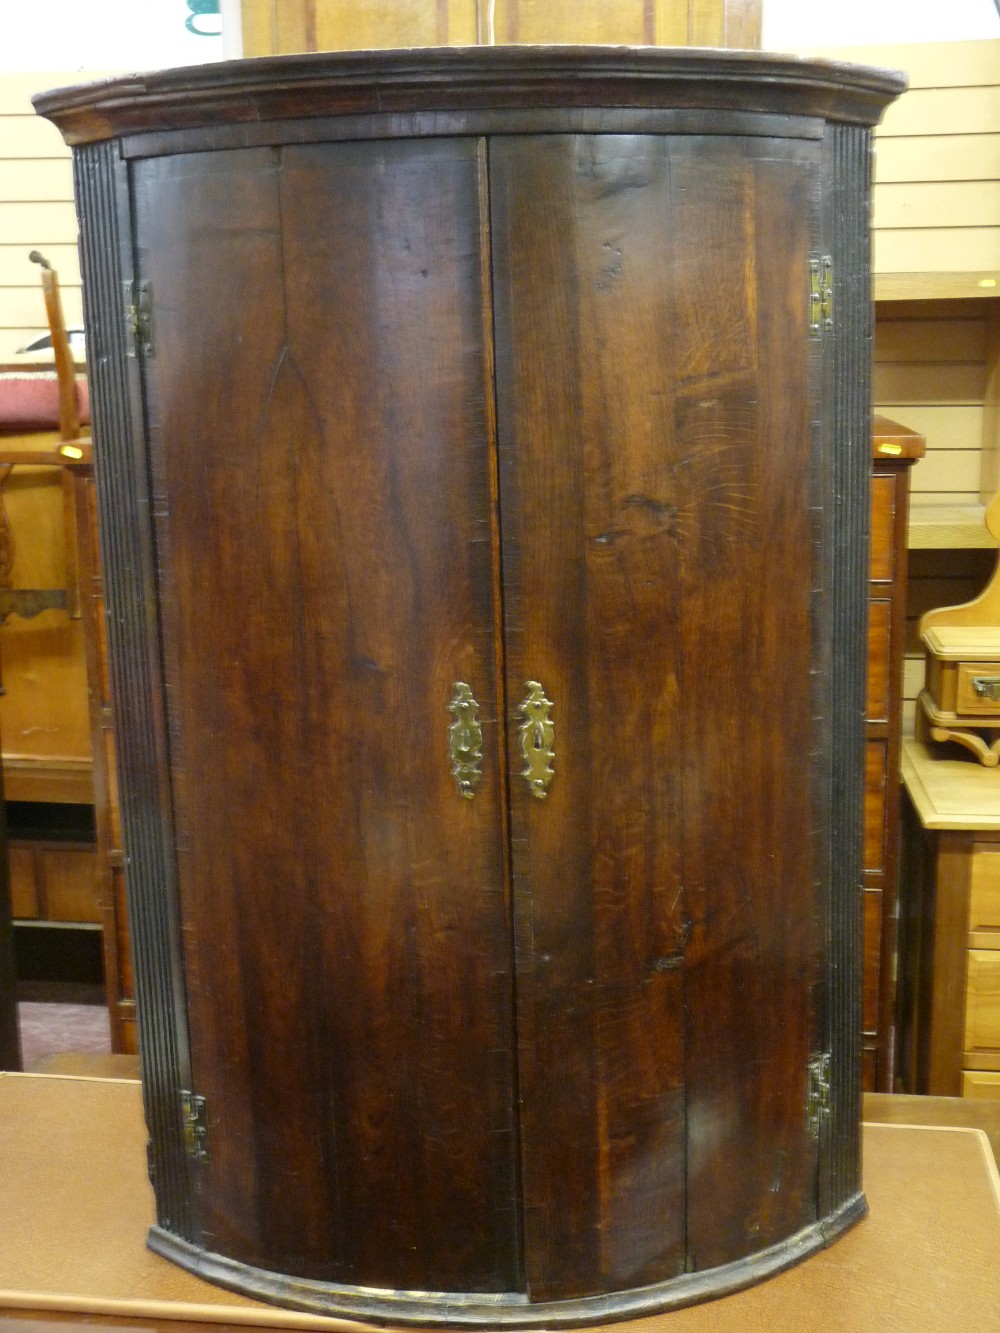 A GEORGIAN OAK BOW FRONT HANGING CORNER CUPBOARD, the doors with brass 'H' hinges and decorative